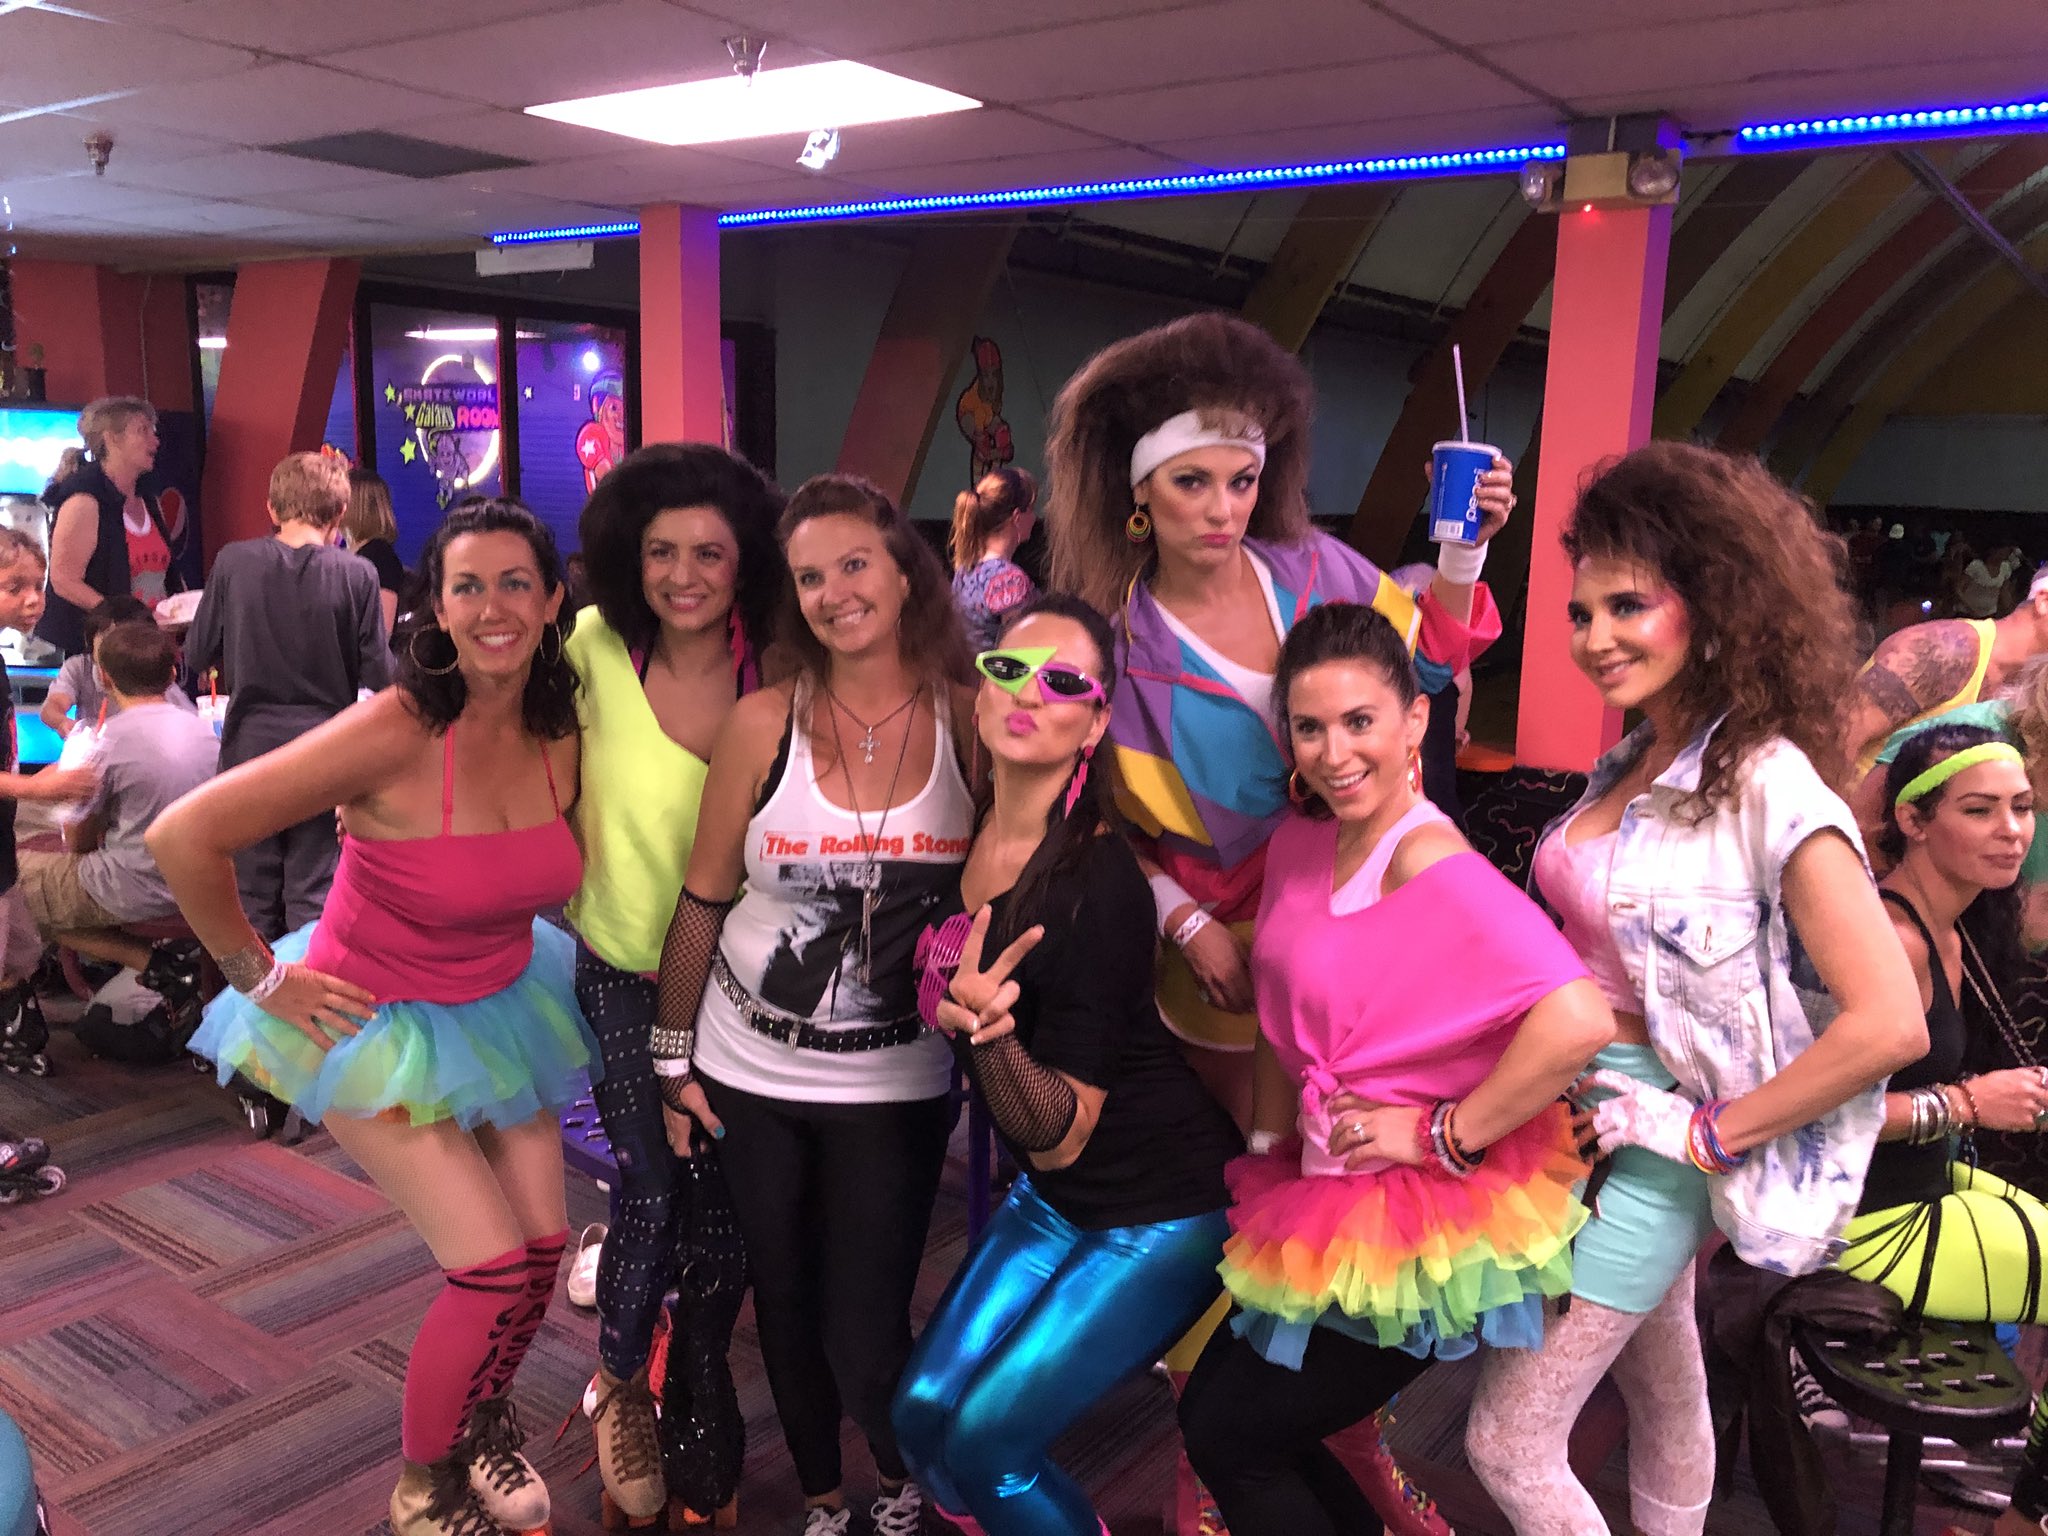 Kate 80's Roller Skating Birthday Party | vlr.eng.br